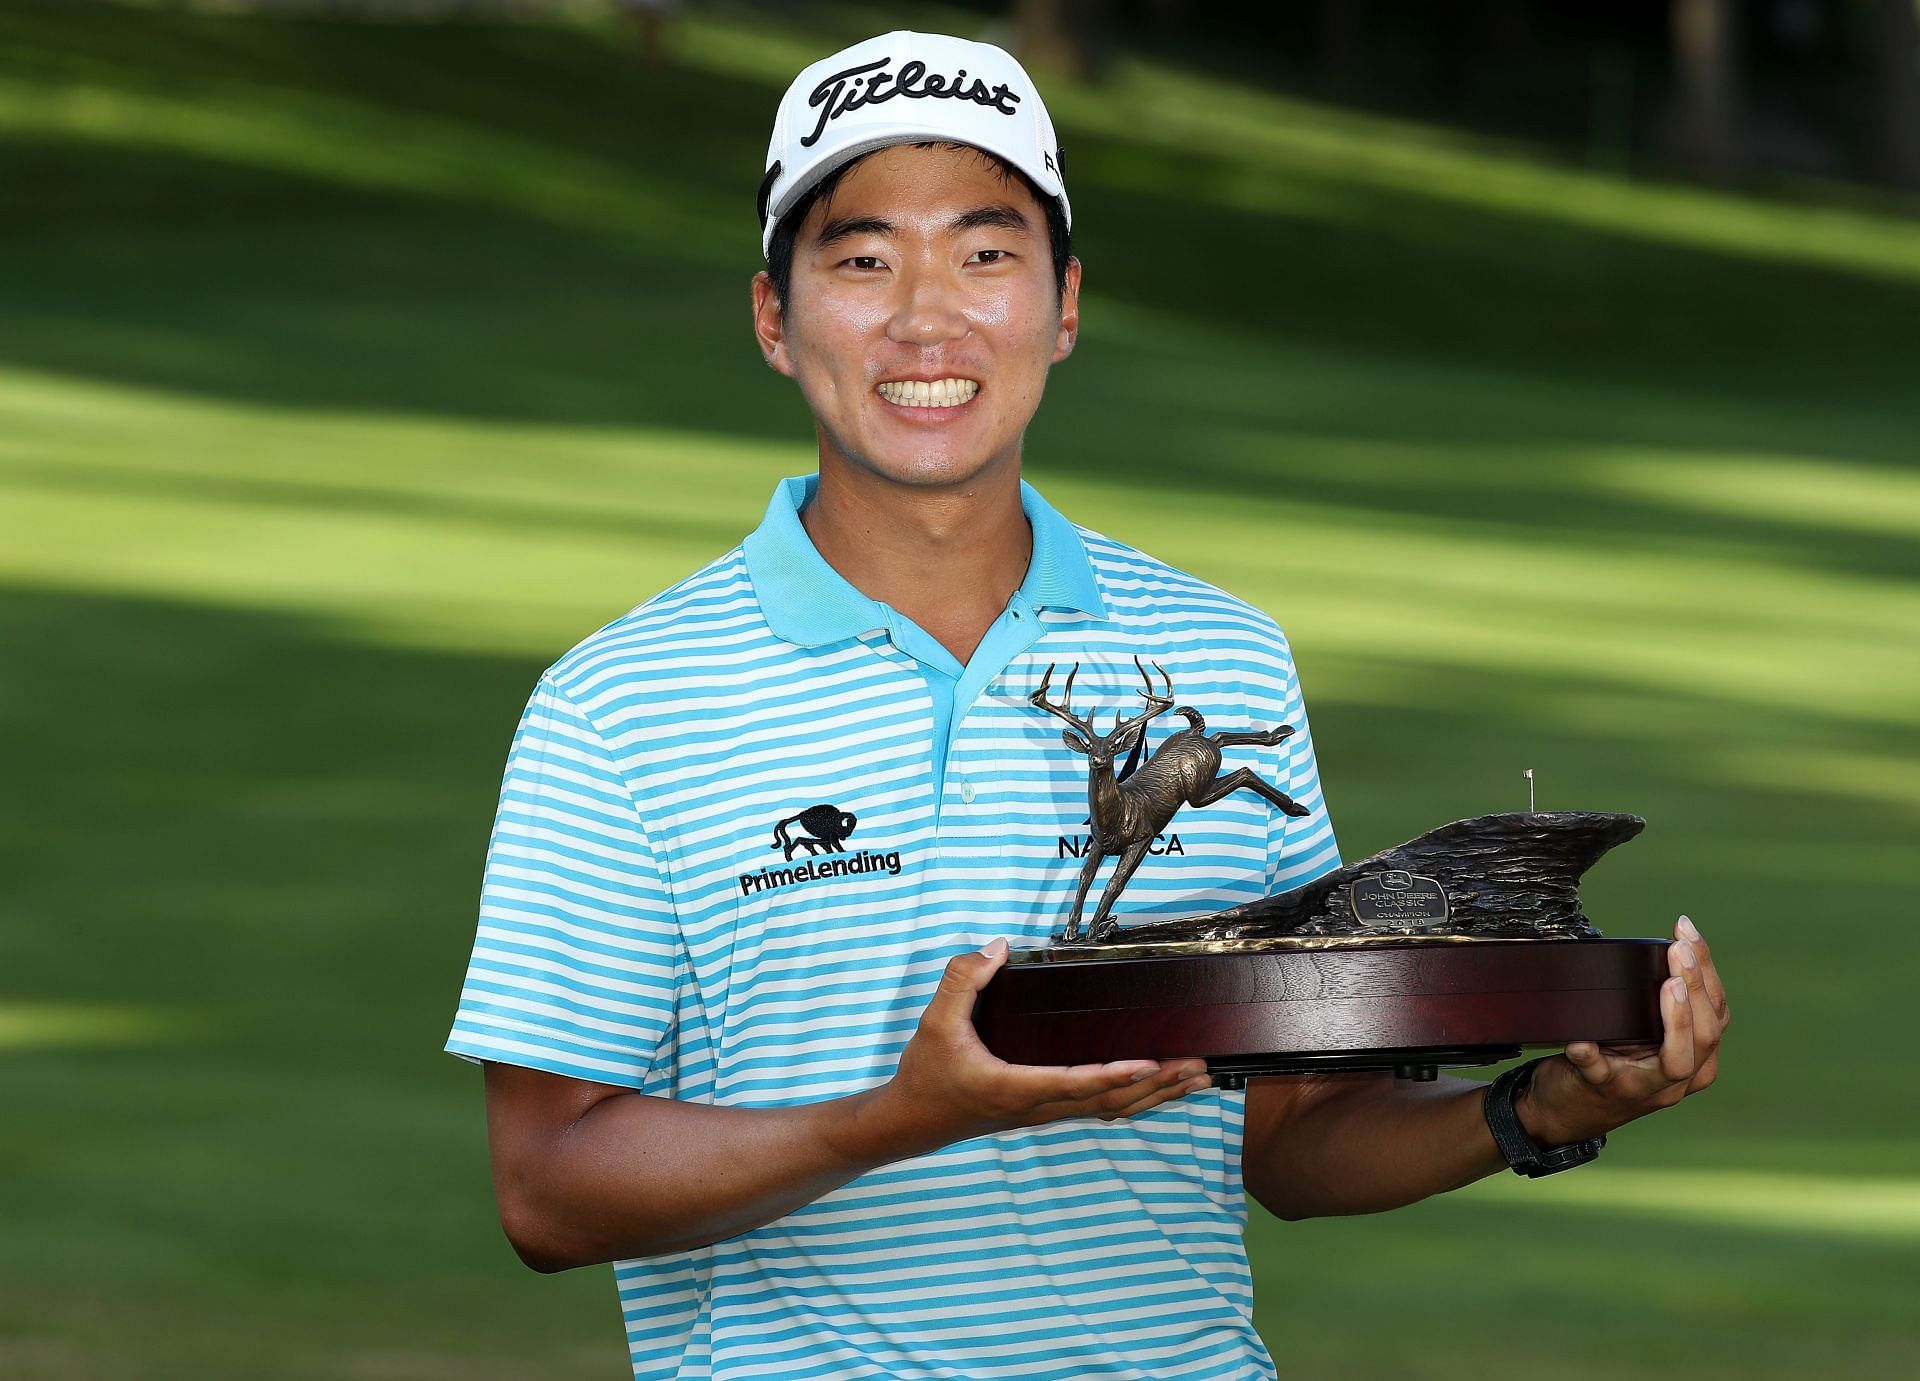 Michael Kim at John Deere Classic - Final Round (Source: Getty Images)